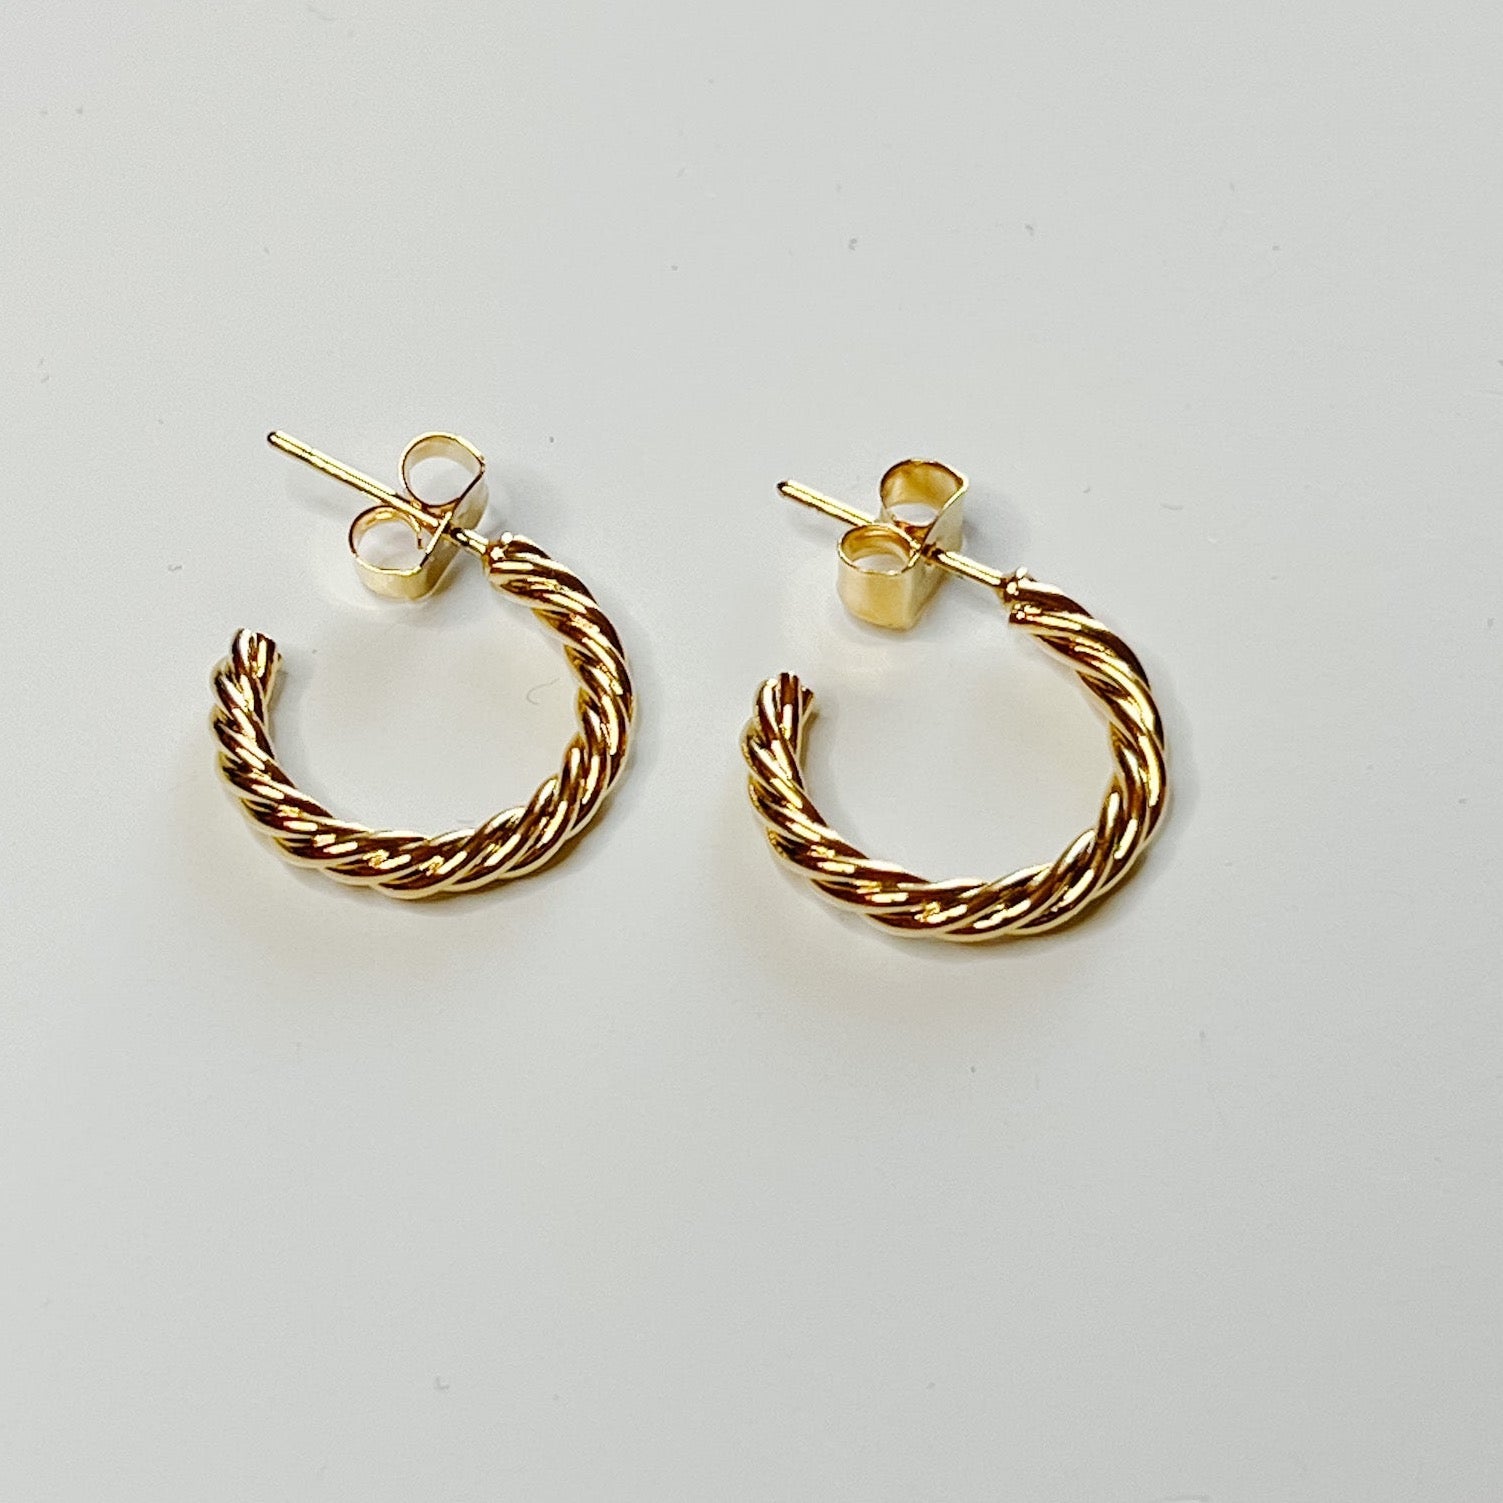 Earrings, Anna - Danshire Market and Design 